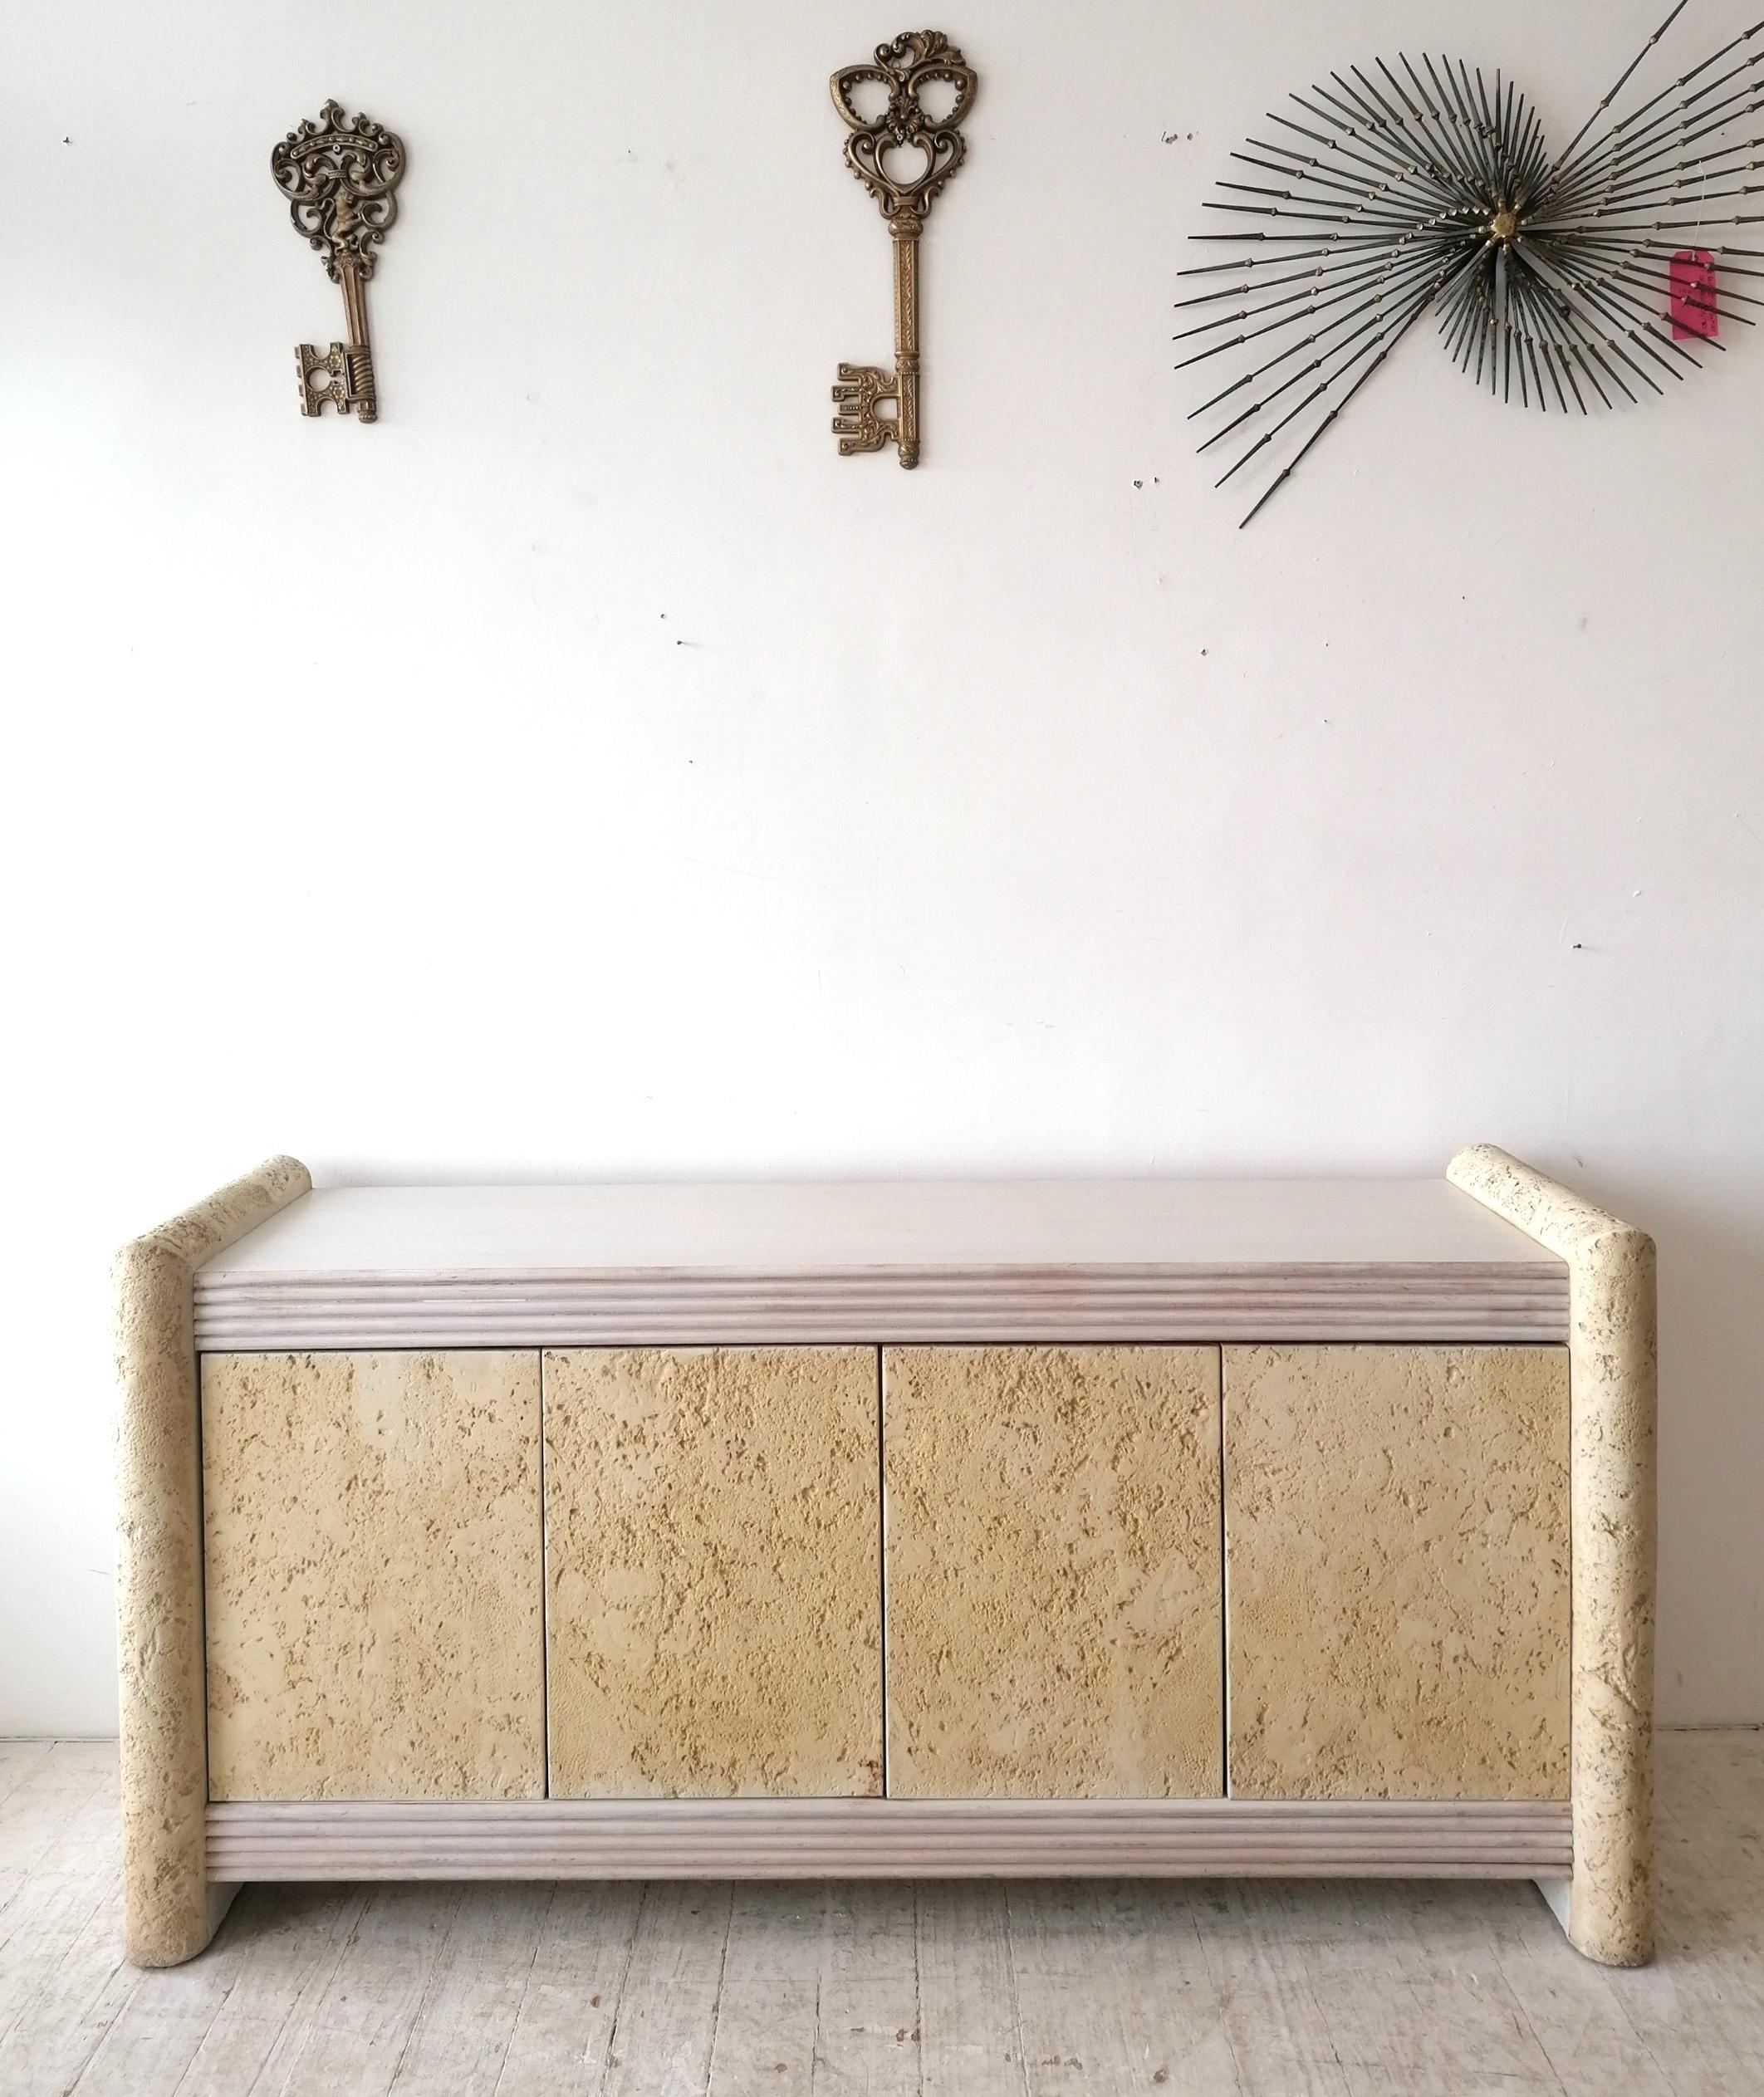 Stylish postmodern American textured concrete & cane sideboard, c1980s.
Top and ends are woodgrain laminate. The textured concrete is a simulation of  'coral stone'- a type of limestone.
Push-Click doors : drawer & storage space at left; adjustable